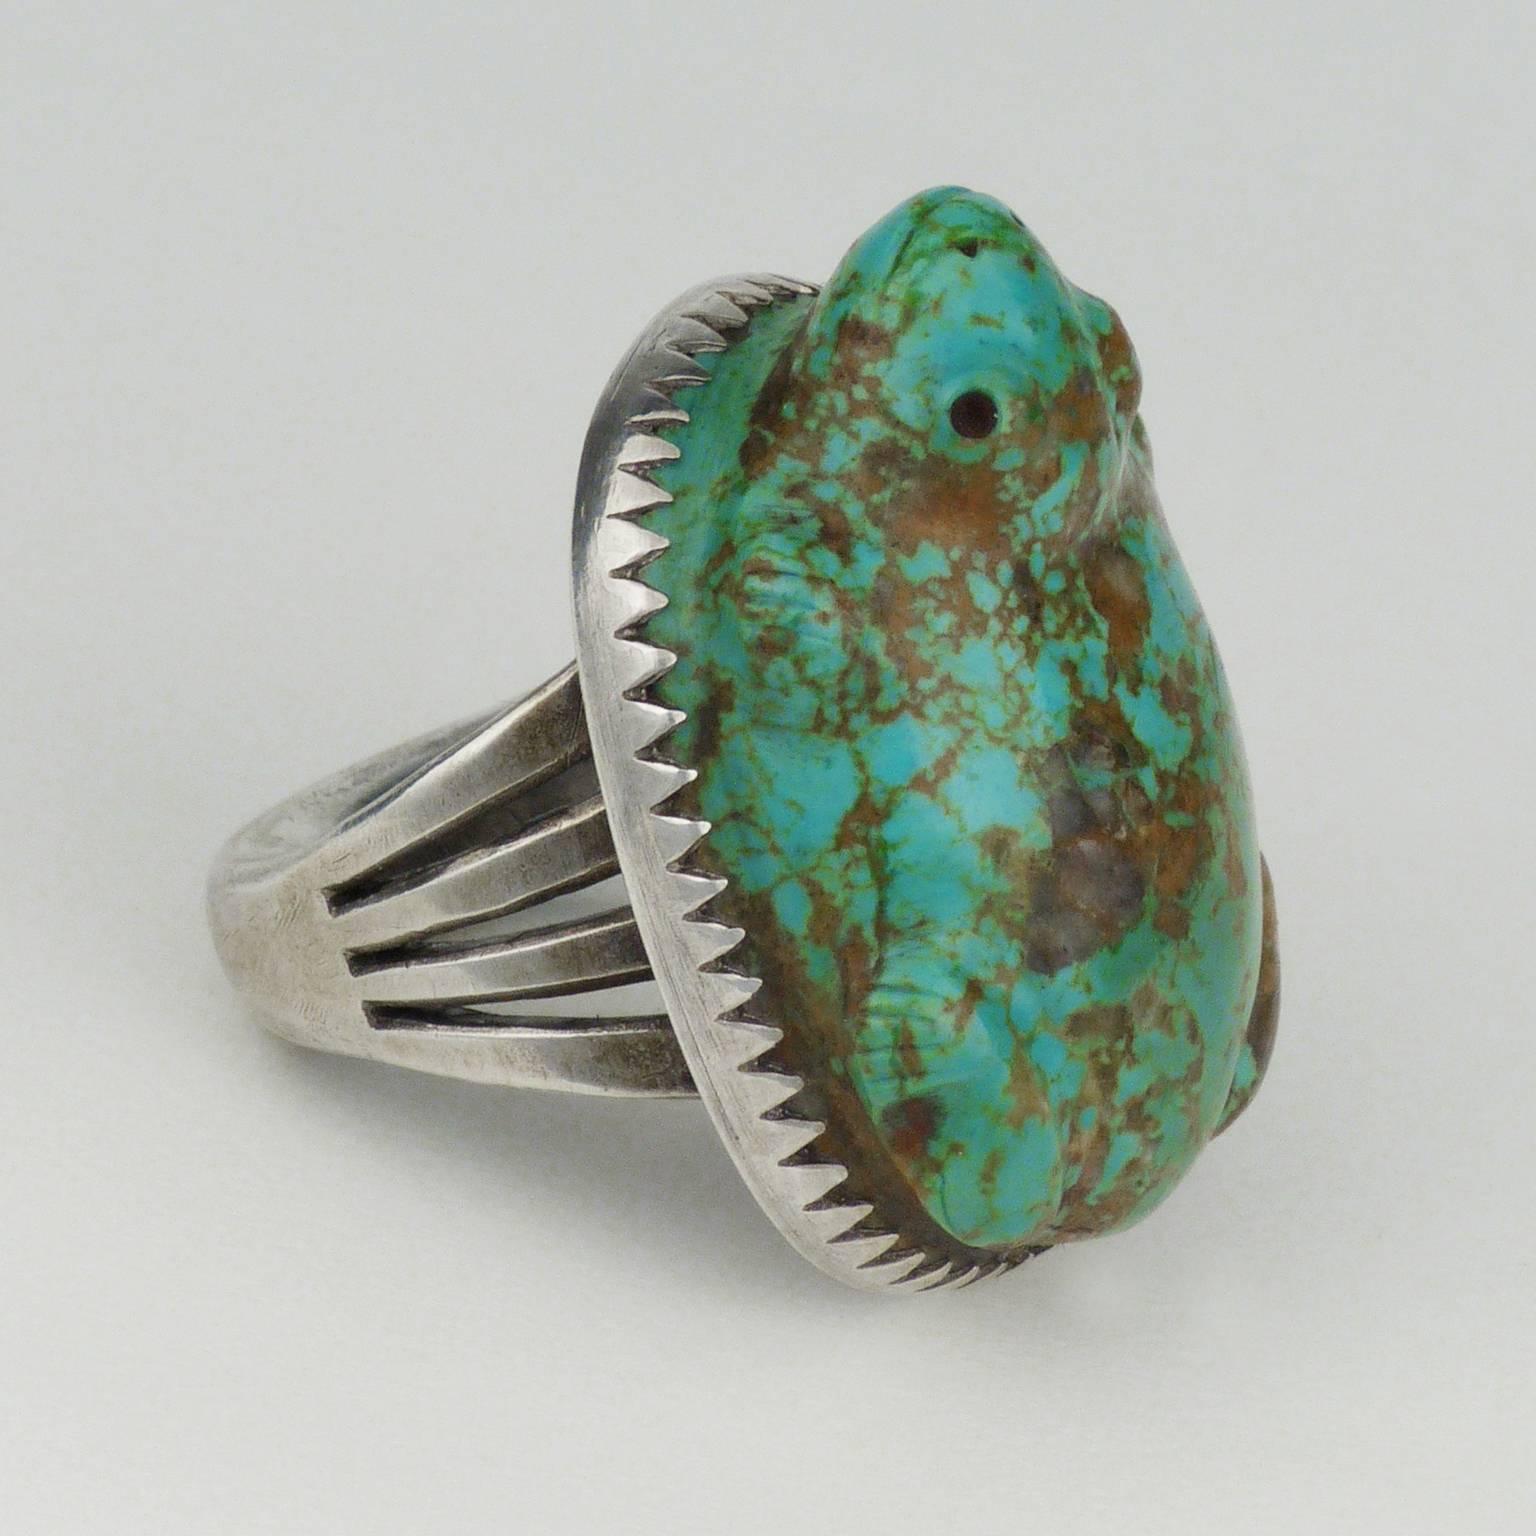 A hand-carved frog in natural turquoise set in a handmade ingot silver setting. The frog is carved by Zuni master Leekya Deyuse (1889-1966) from natural American turquoise. The setting was crafted by modern master silversmith Steven Tiffany from